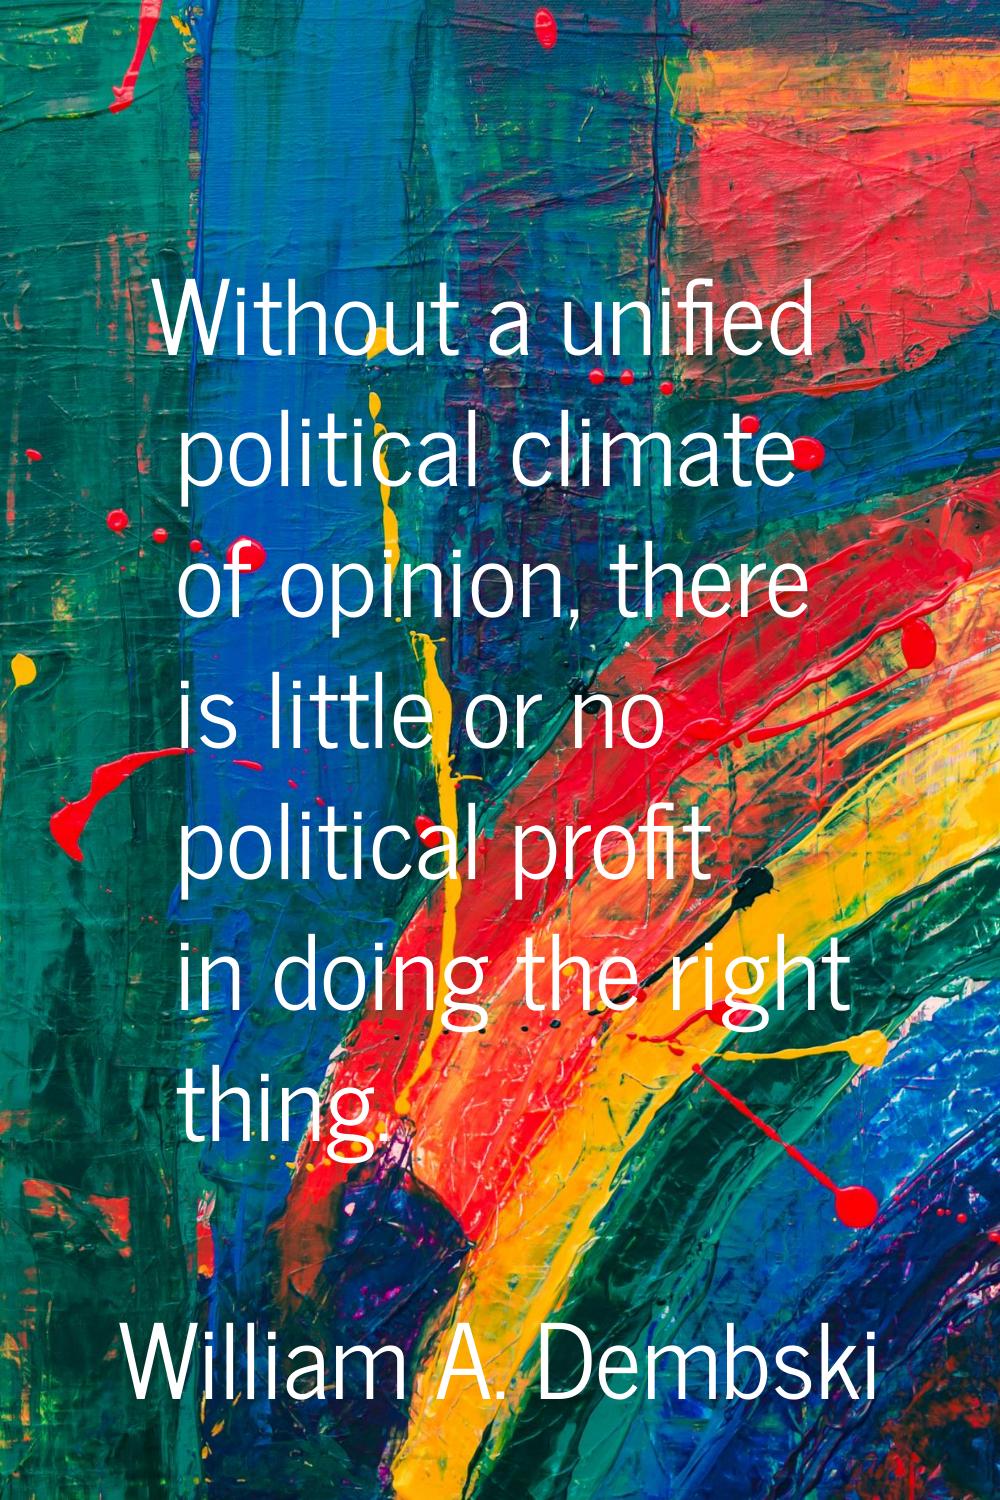 Without a unified political climate of opinion, there is little or no political profit in doing the